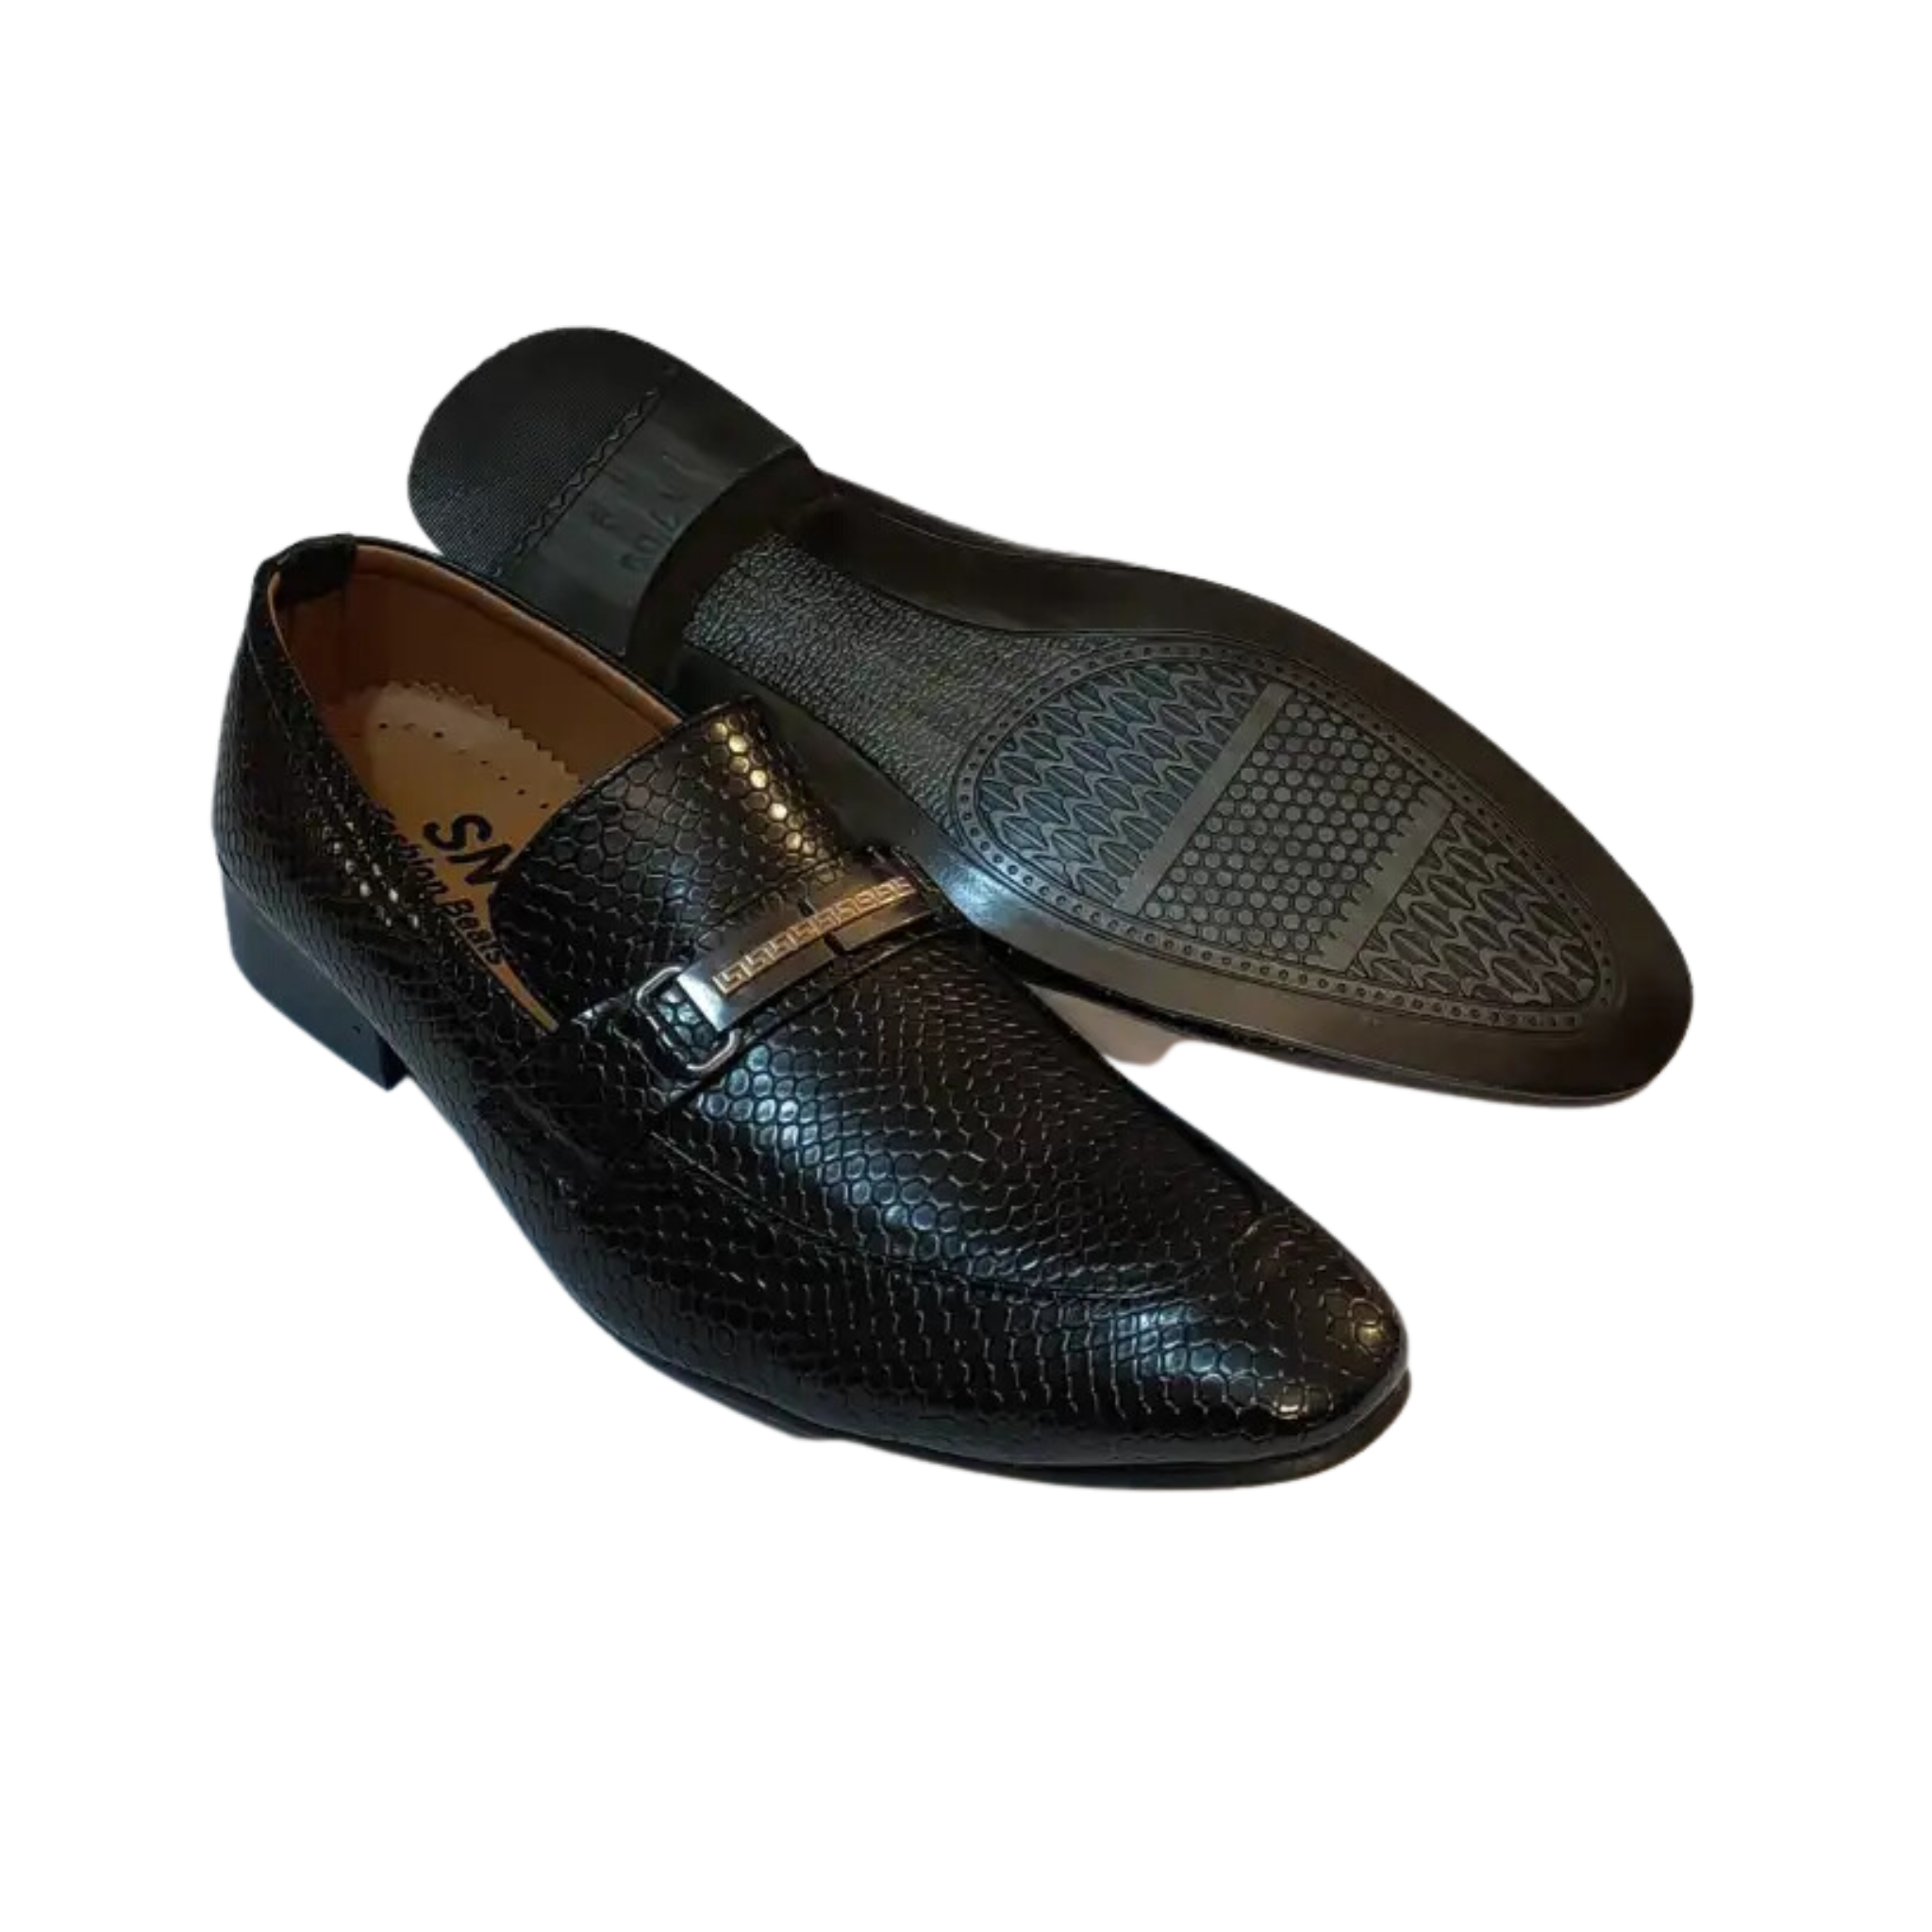 Shoes, Formal Wear and Foamy Insole, for Men